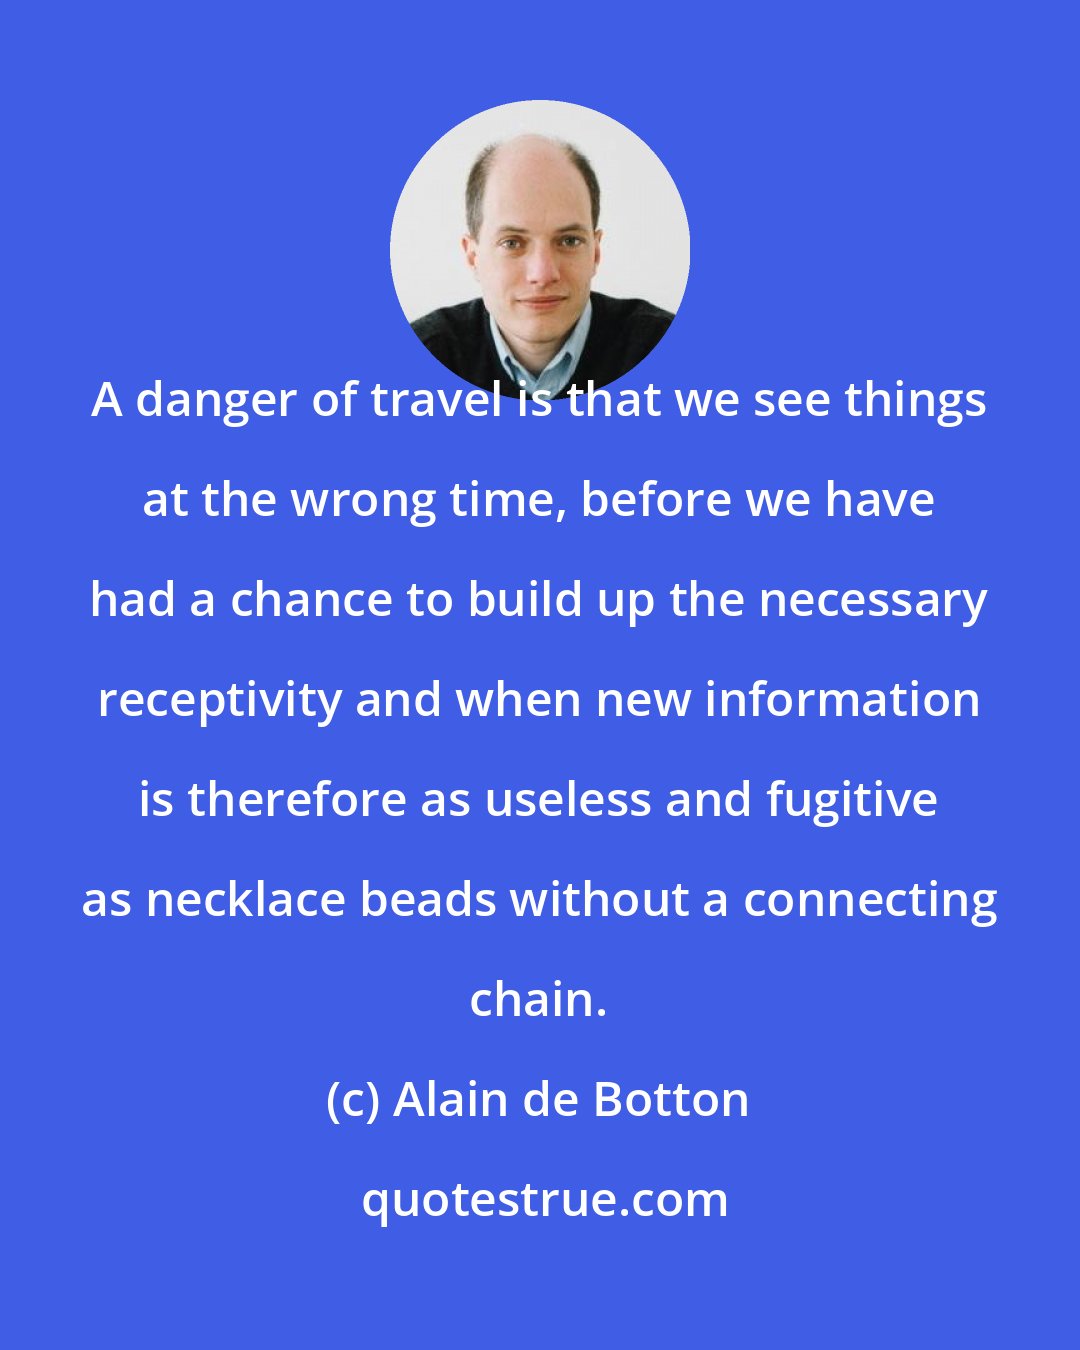 Alain de Botton: A danger of travel is that we see things at the wrong time, before we have had a chance to build up the necessary receptivity and when new information is therefore as useless and fugitive as necklace beads without a connecting chain.